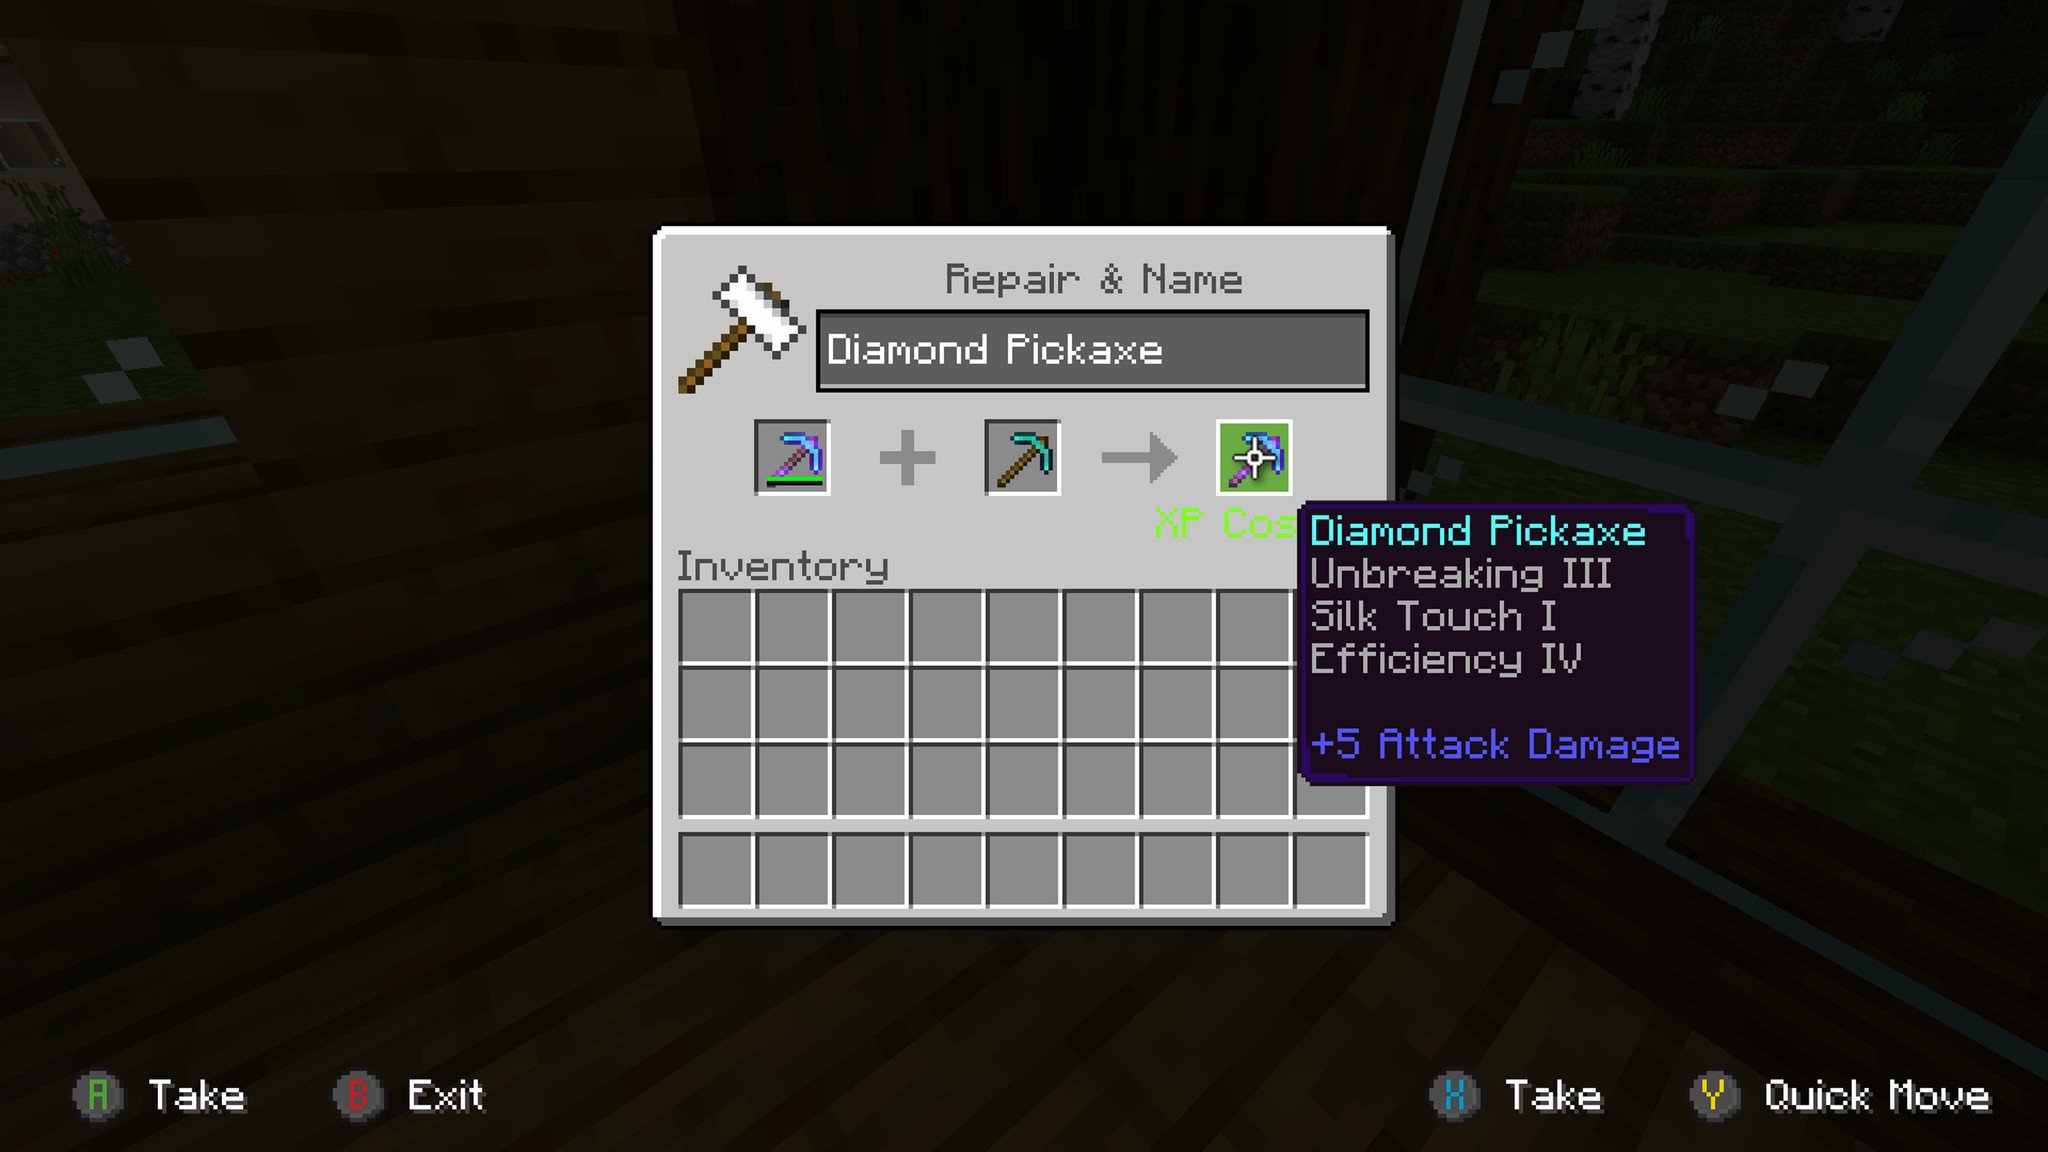 The pickaxe is repaired